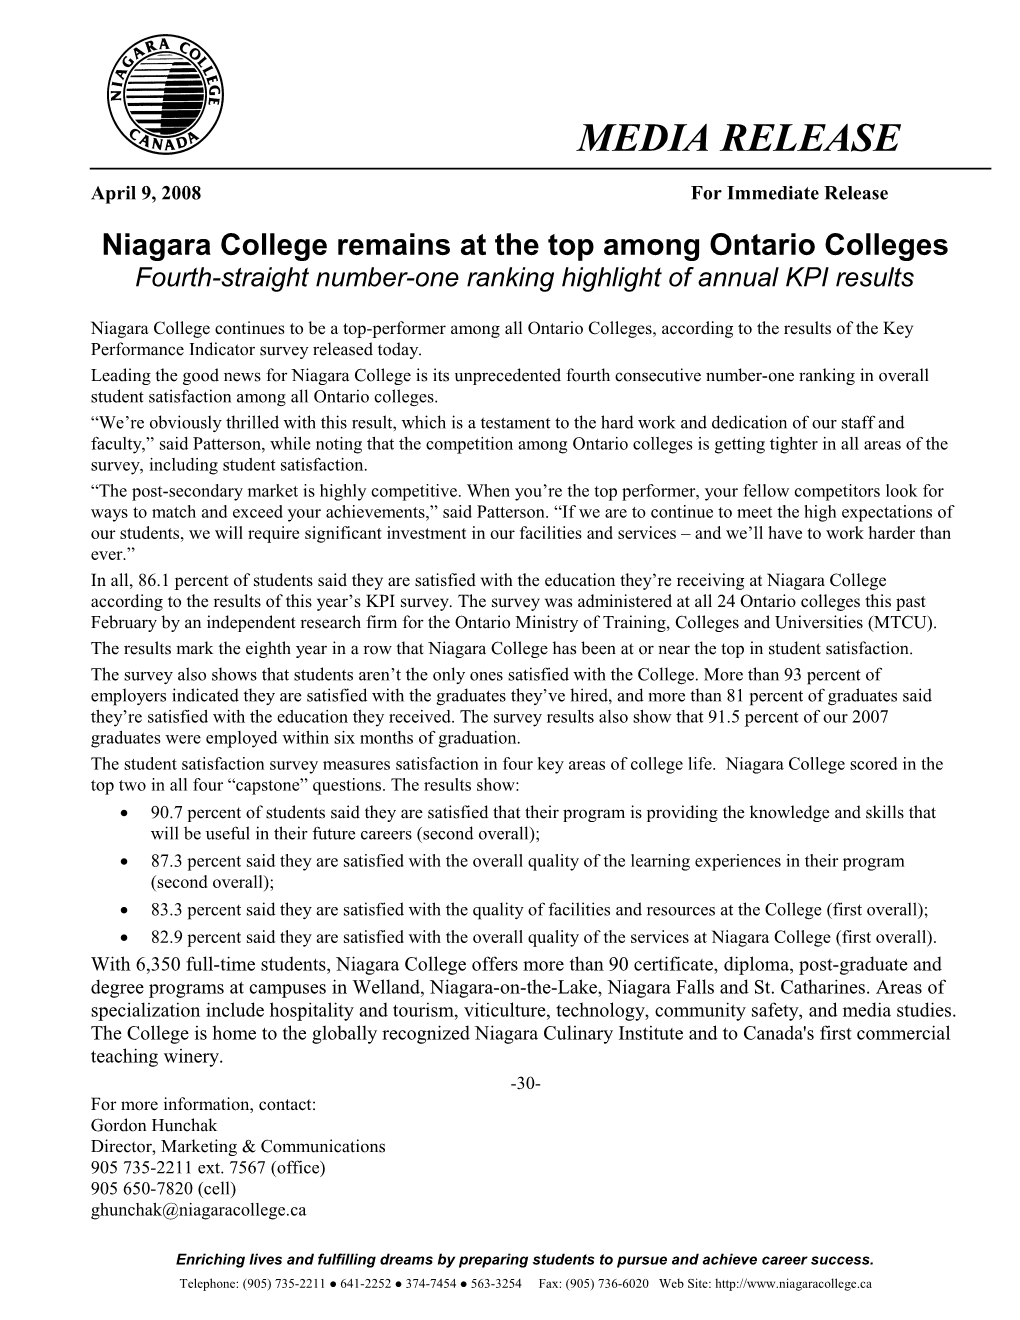 Niagara College Remains at the Top Among Ontario Colleges